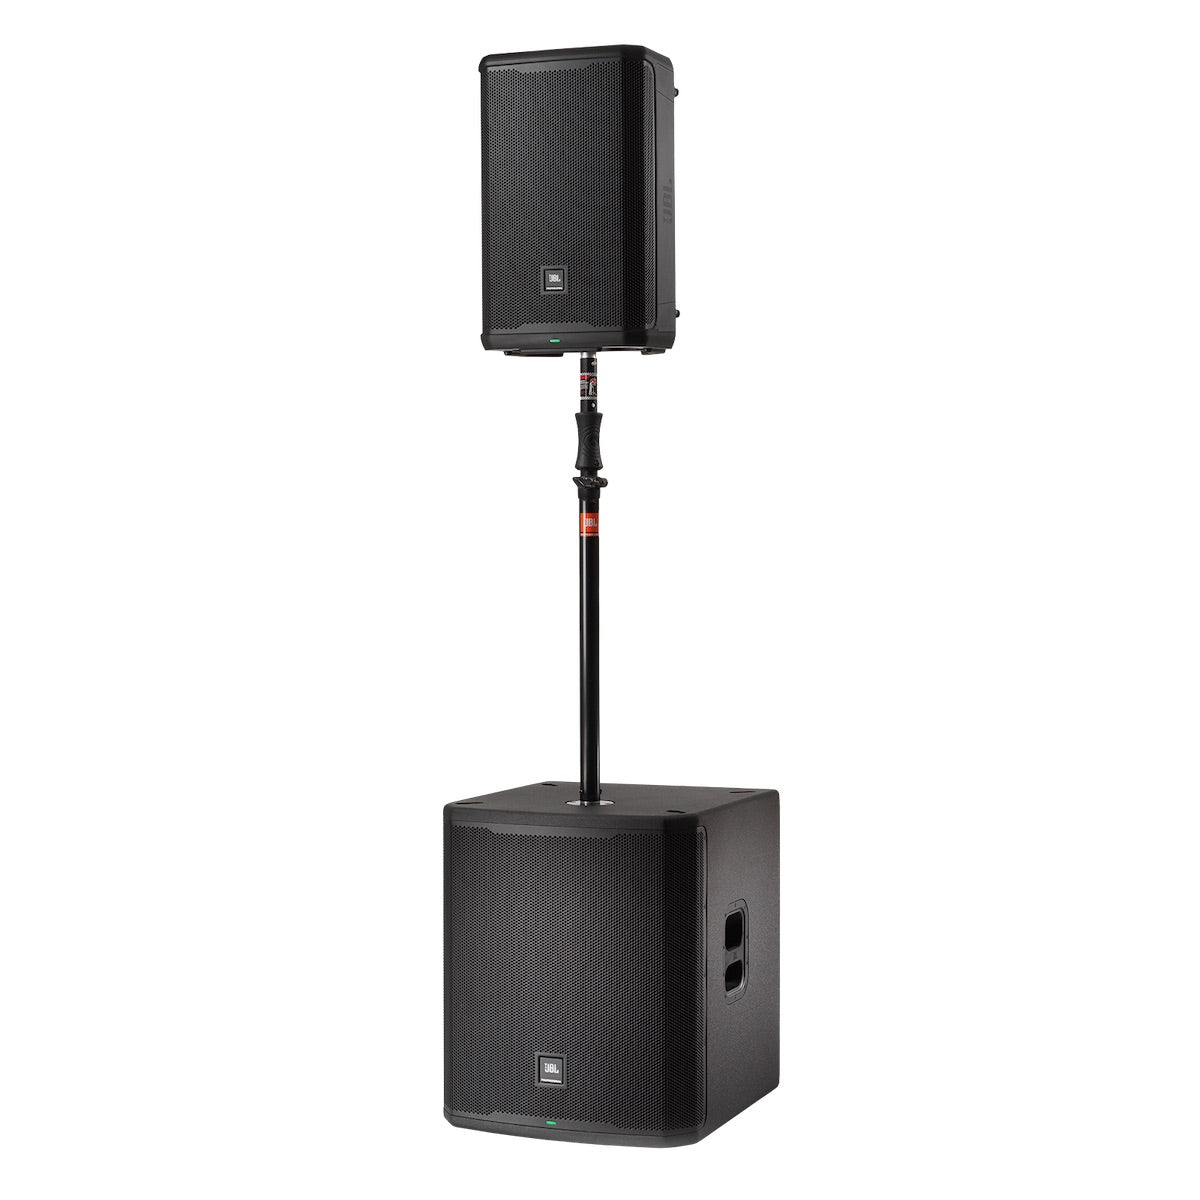 JBL PRX918XLF - Portable 18-inch Powered Subwoofer, with pole mount